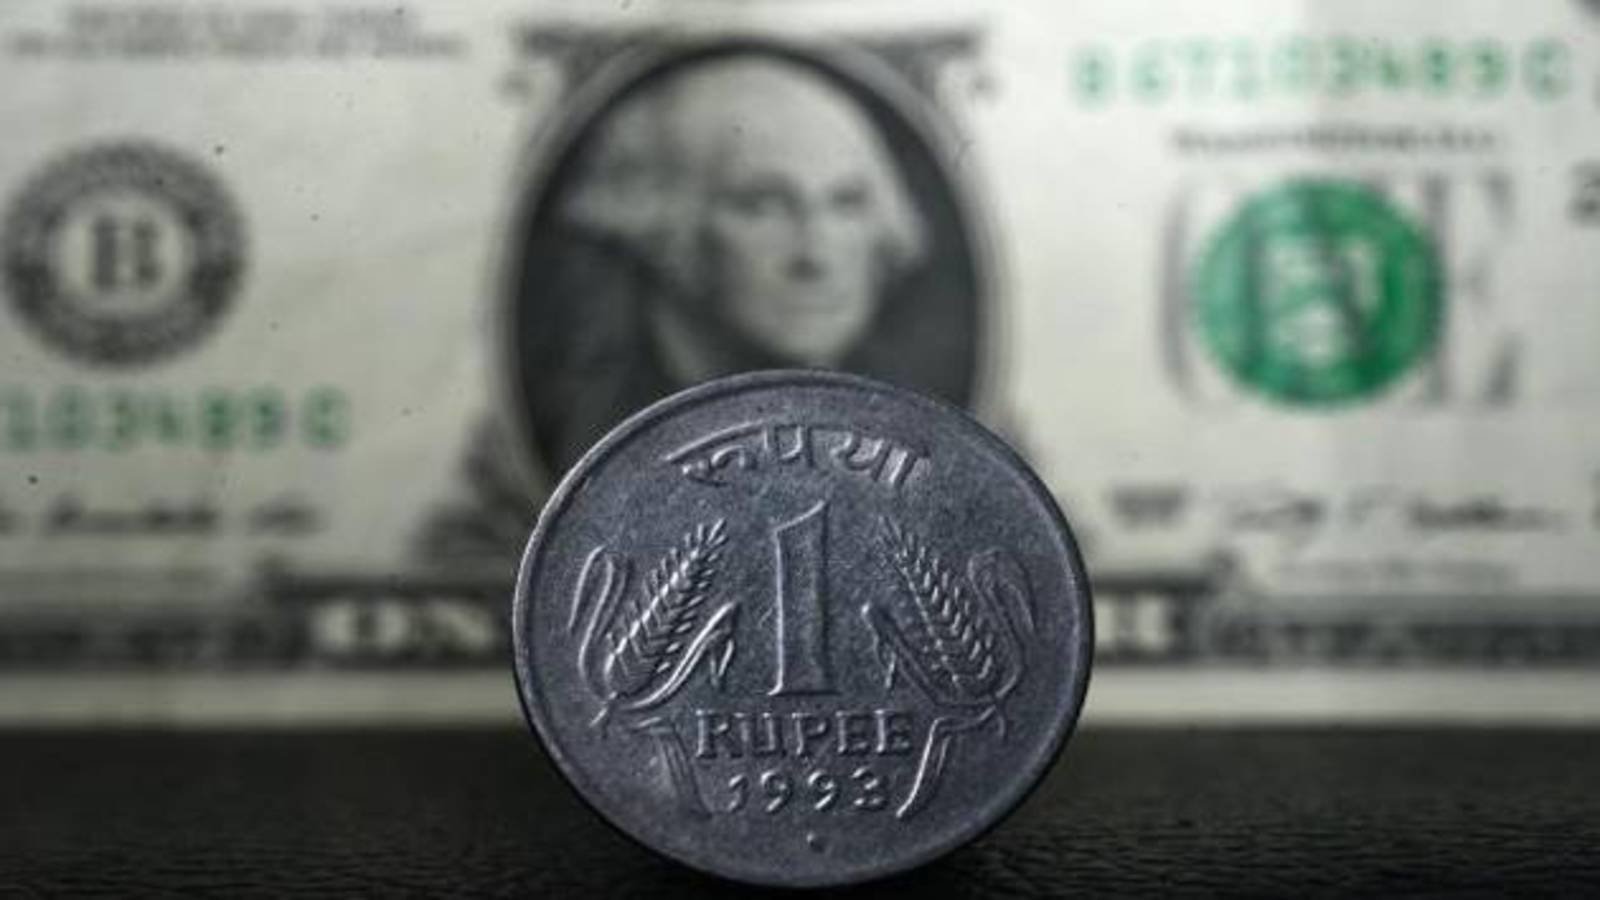 The Indian Rupee strengthens by 4 paise, reaching 82.92 against the US dollar during early trading